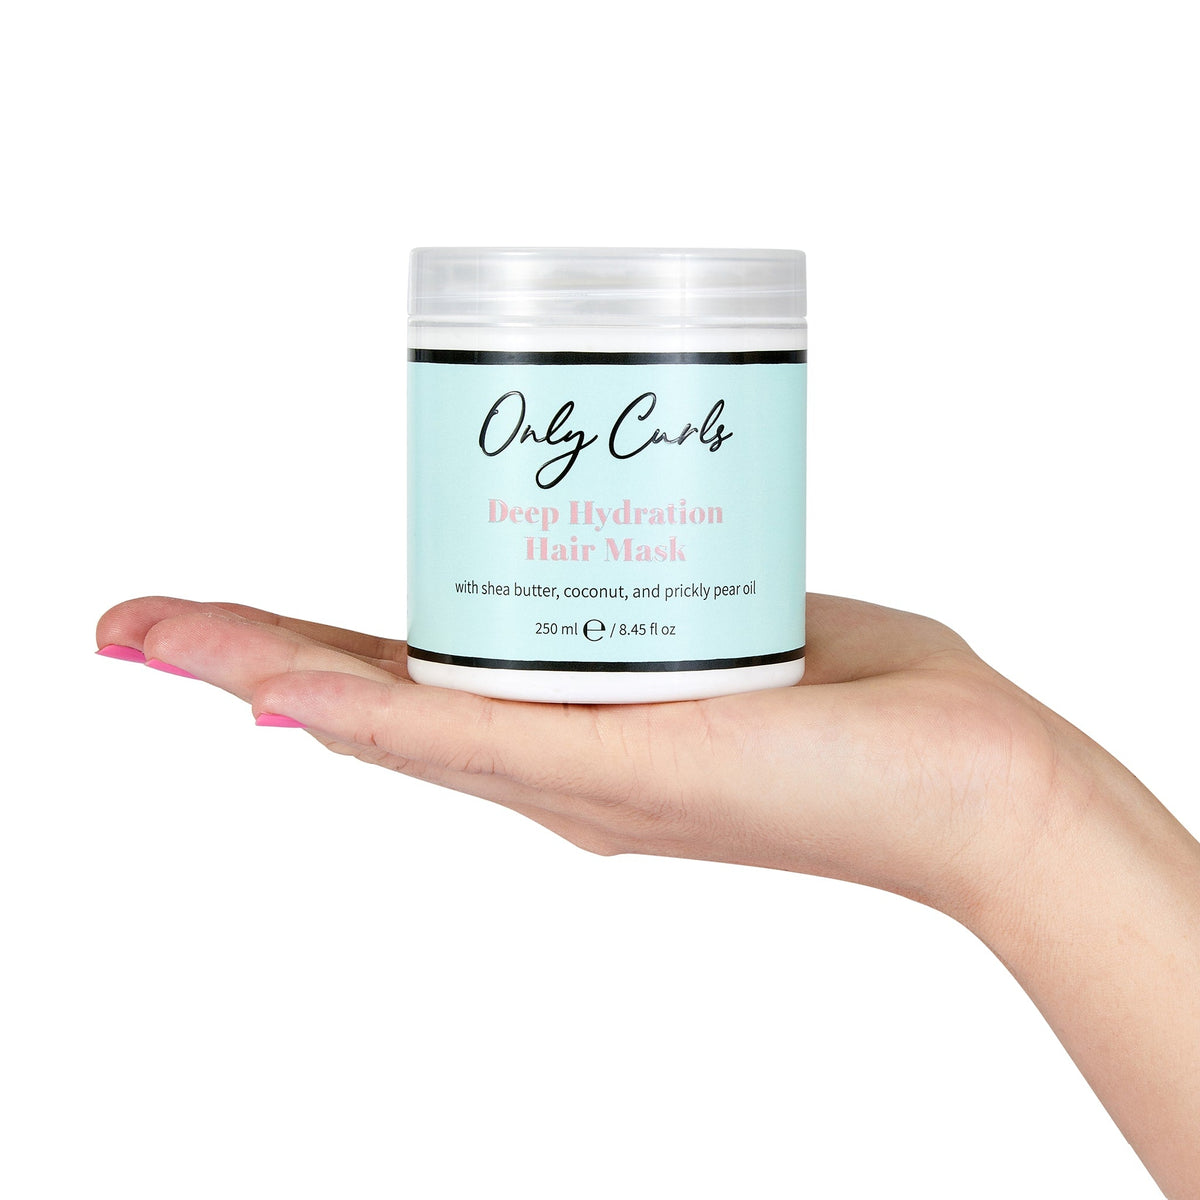 Only Curls Deep Hydration Hair Mask on hand - Only Curls Hand shot